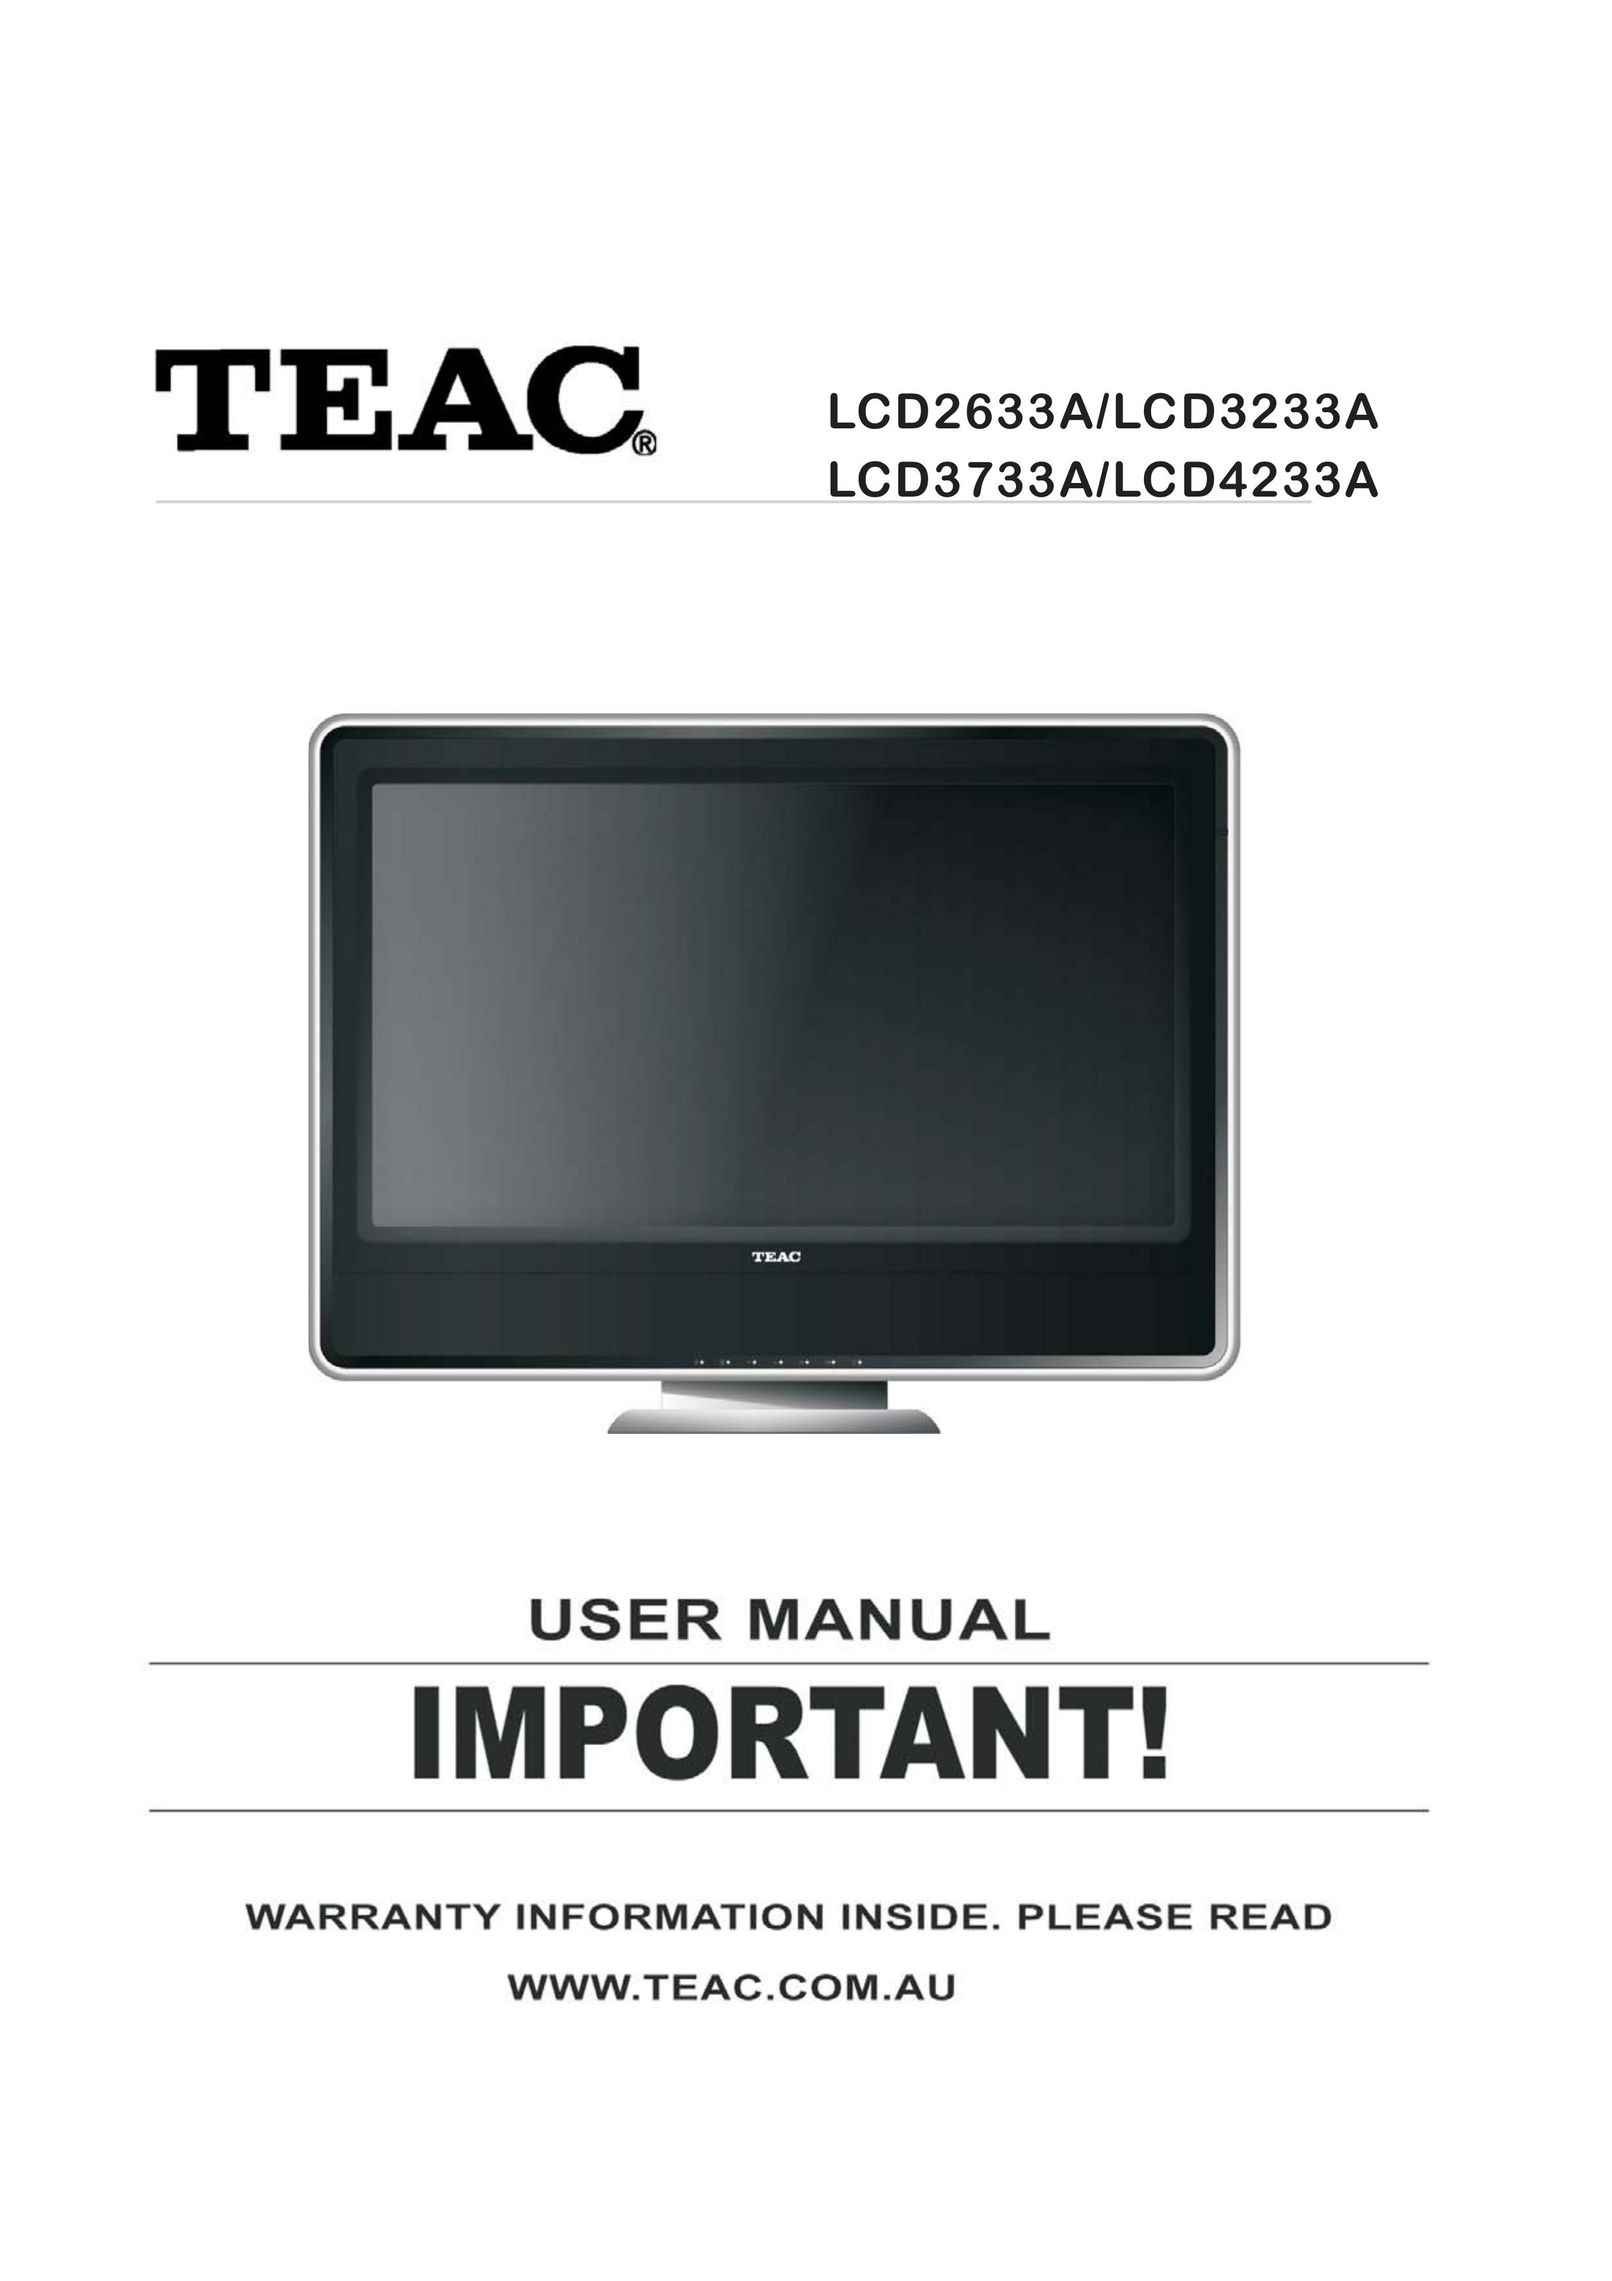 Teac LCD3733A Flat Panel Television User Manual